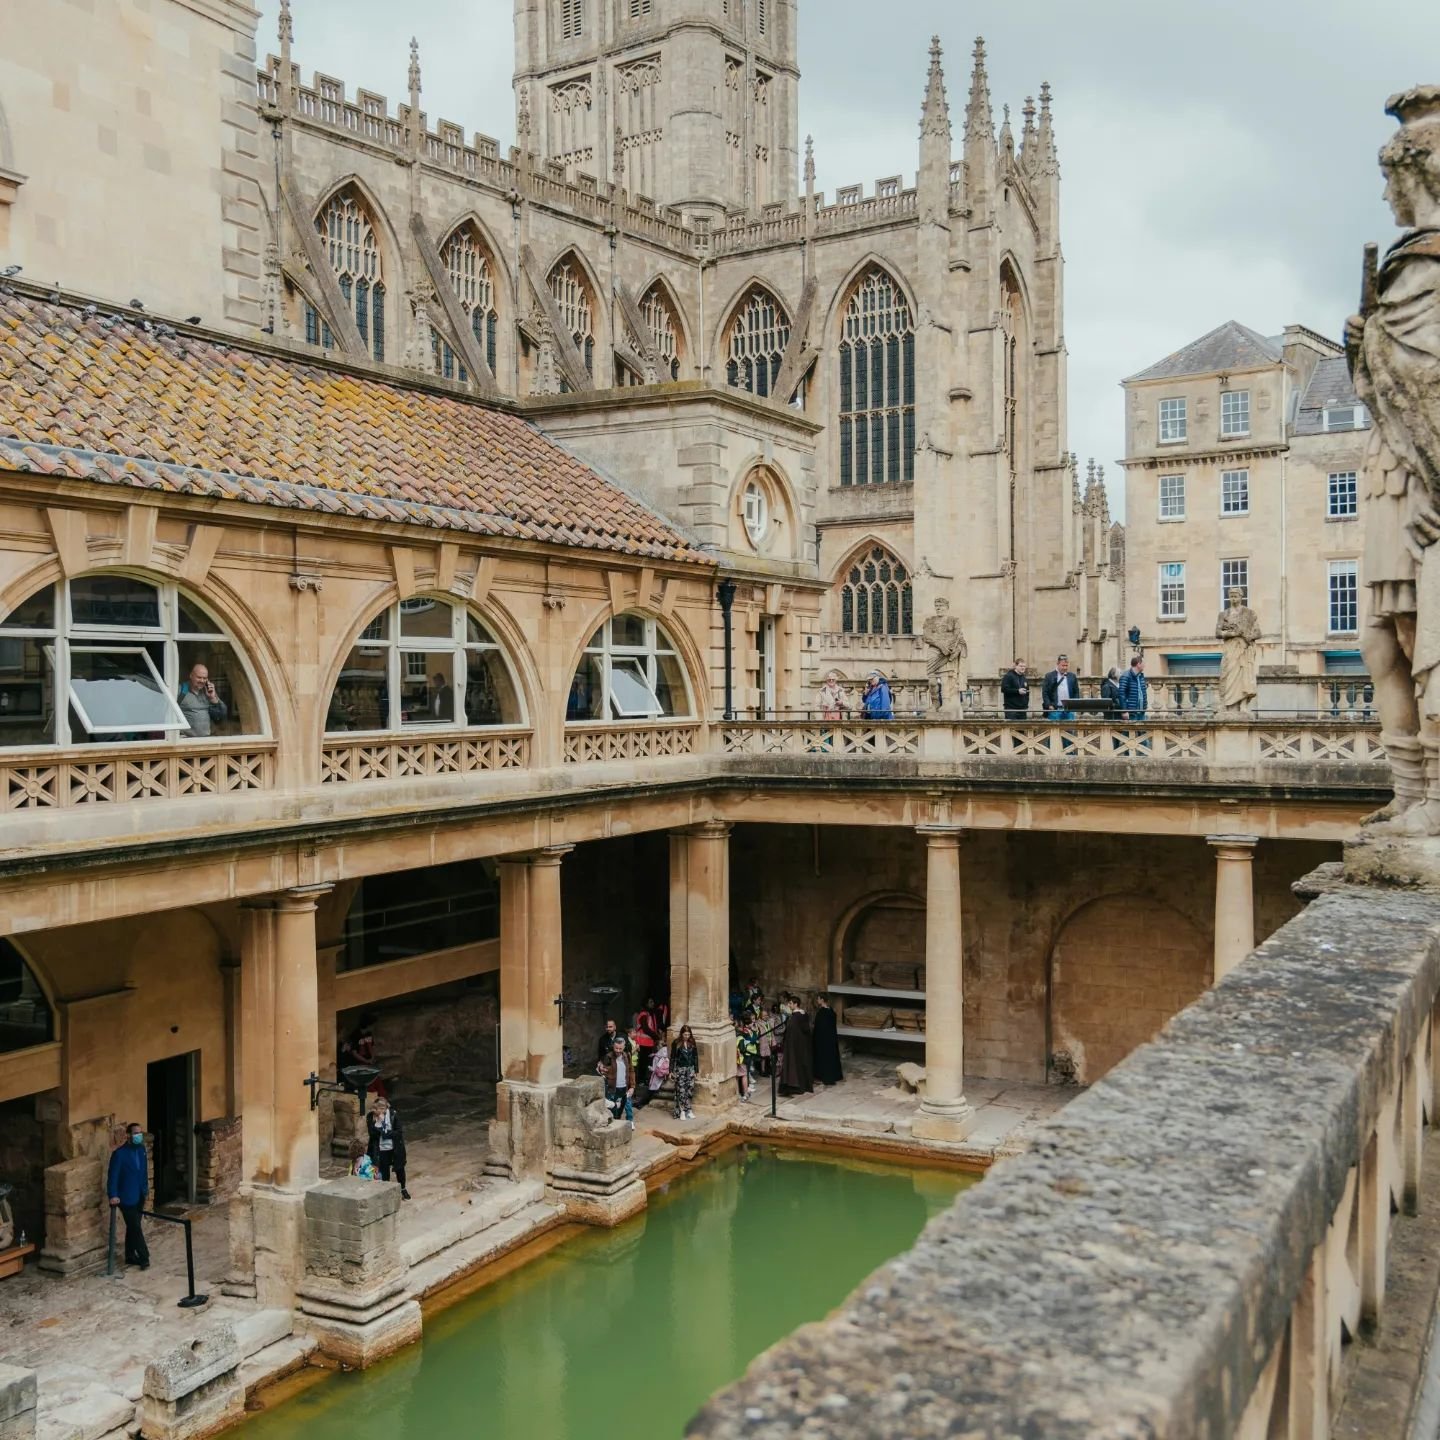 I've just finished up a contract supporting the team at @theromanbaths with their day-to-day digital marketing needs at a busy time. 

I've spent the last three months immersed in promoting an attraction rich with stories stretching back 2,000 years.